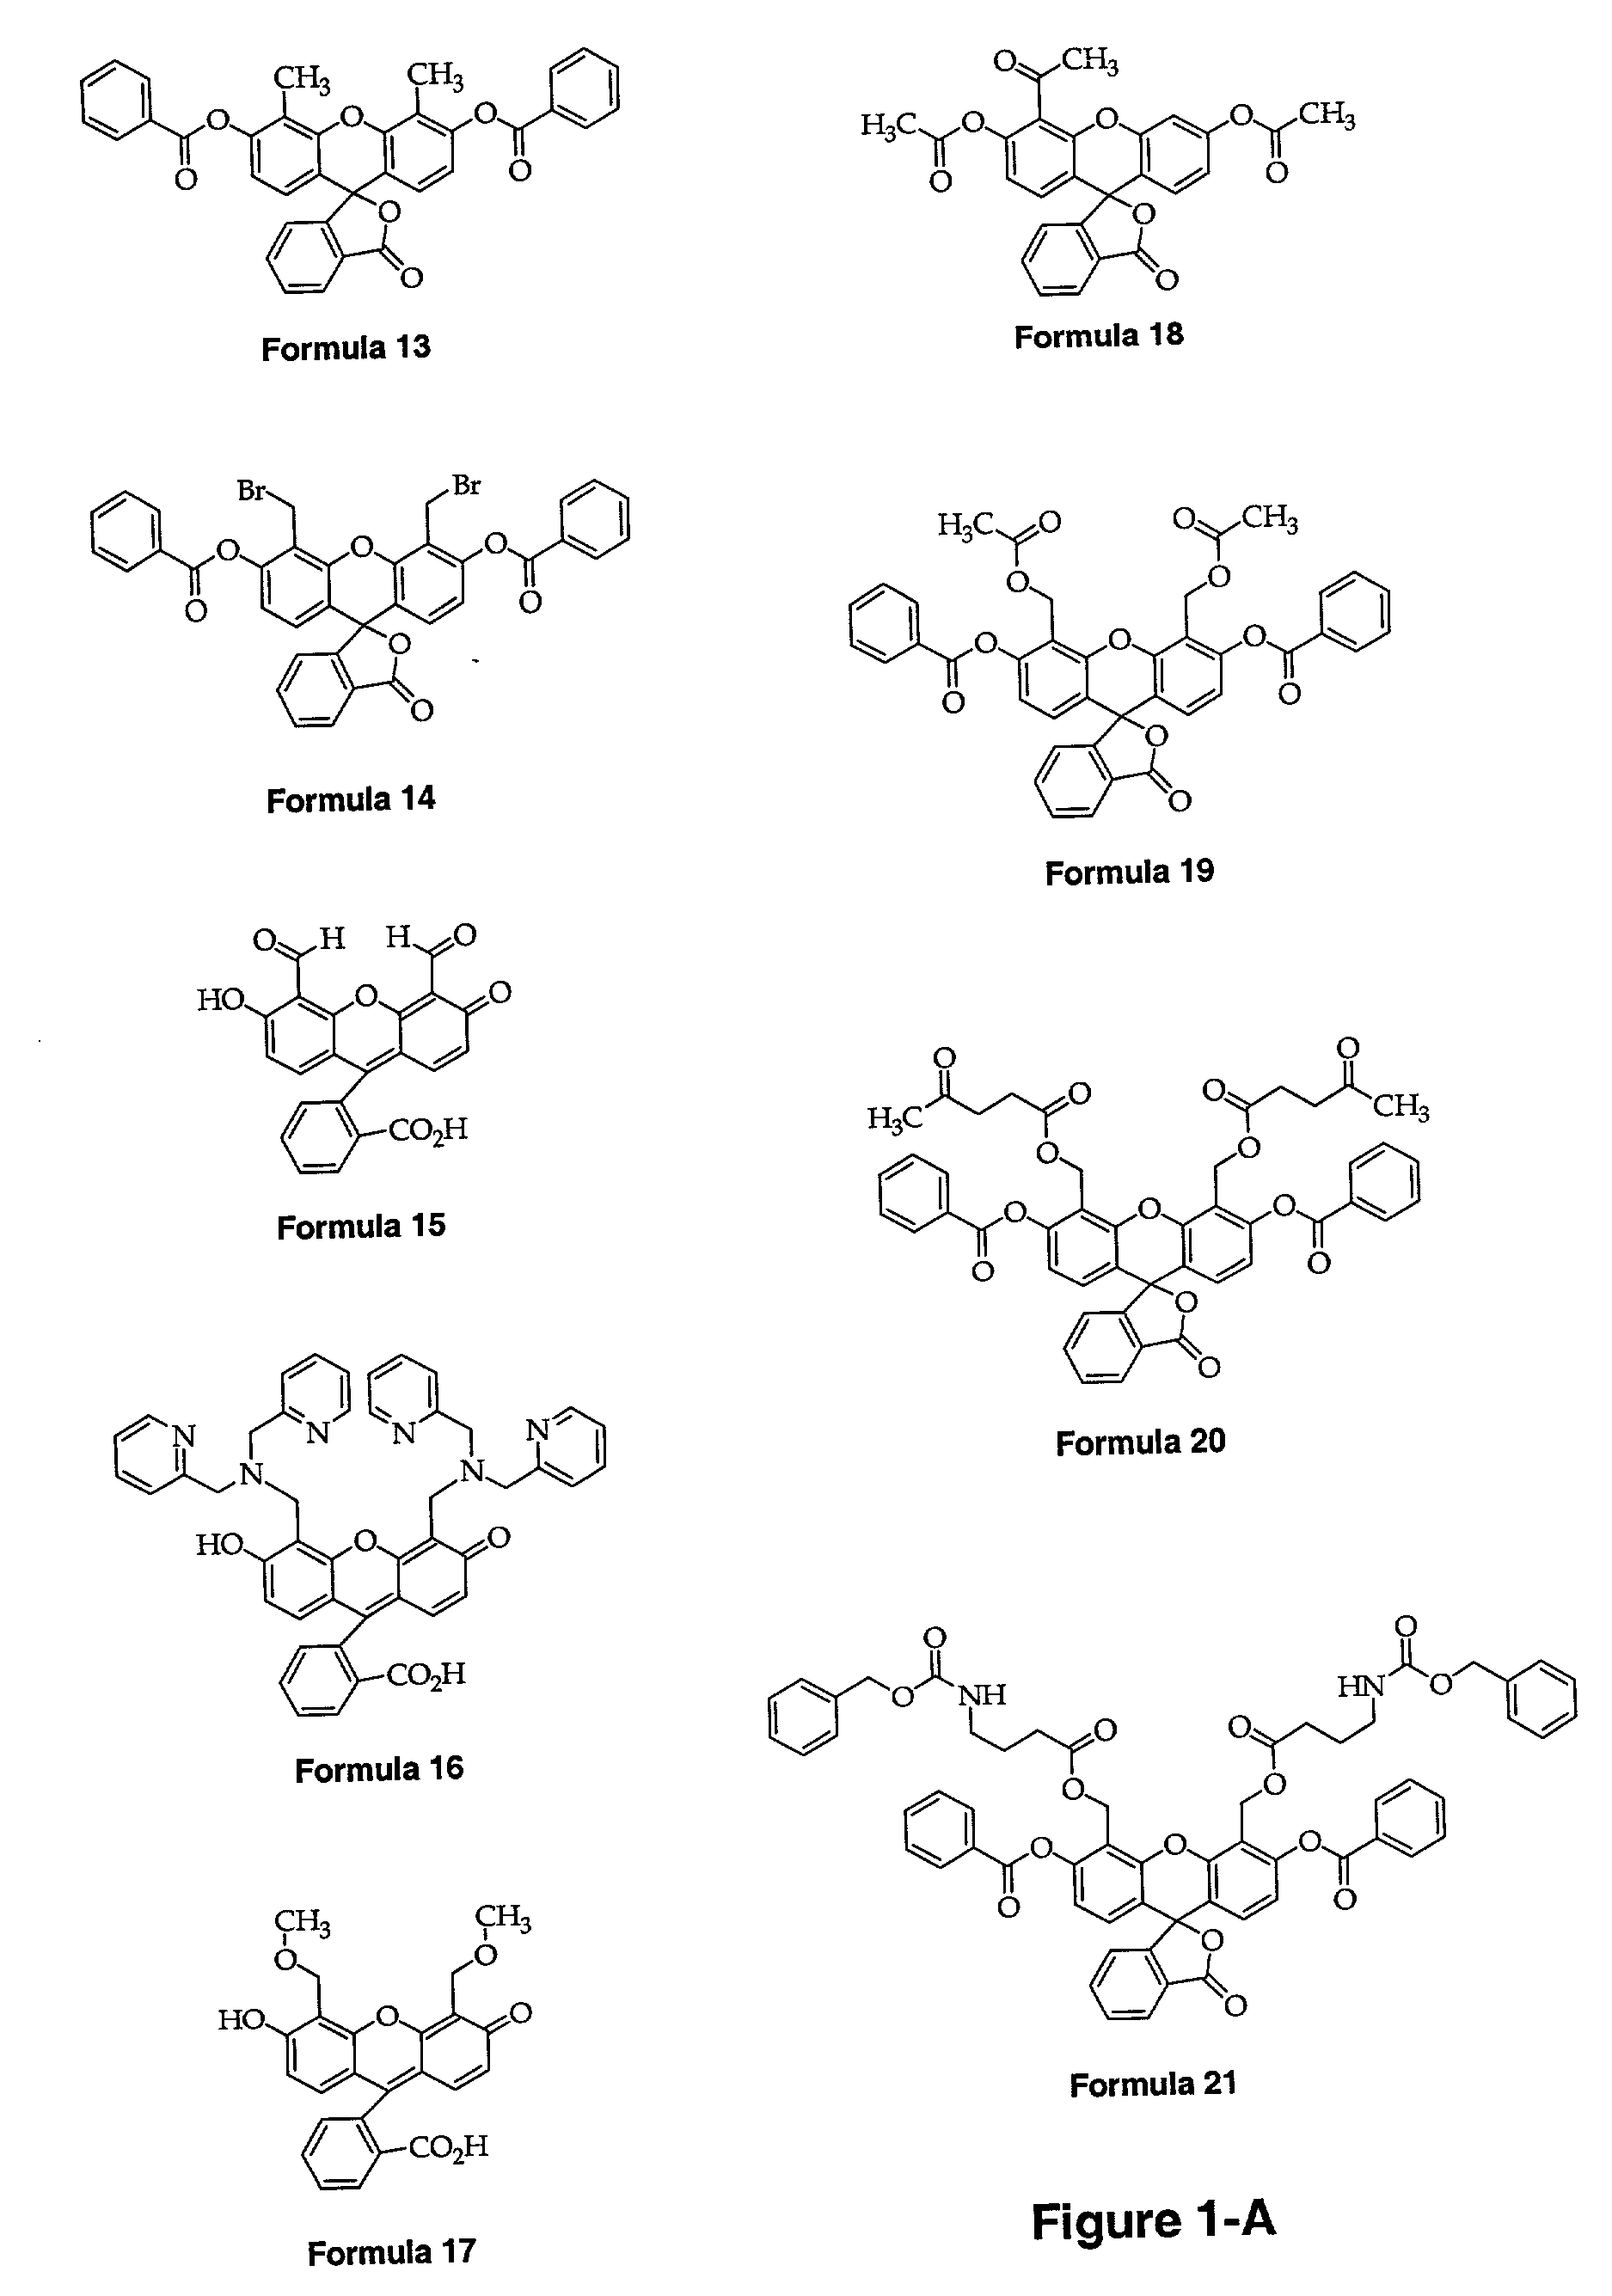 Fluorescein-based metal sensors, and methods of making and using the same